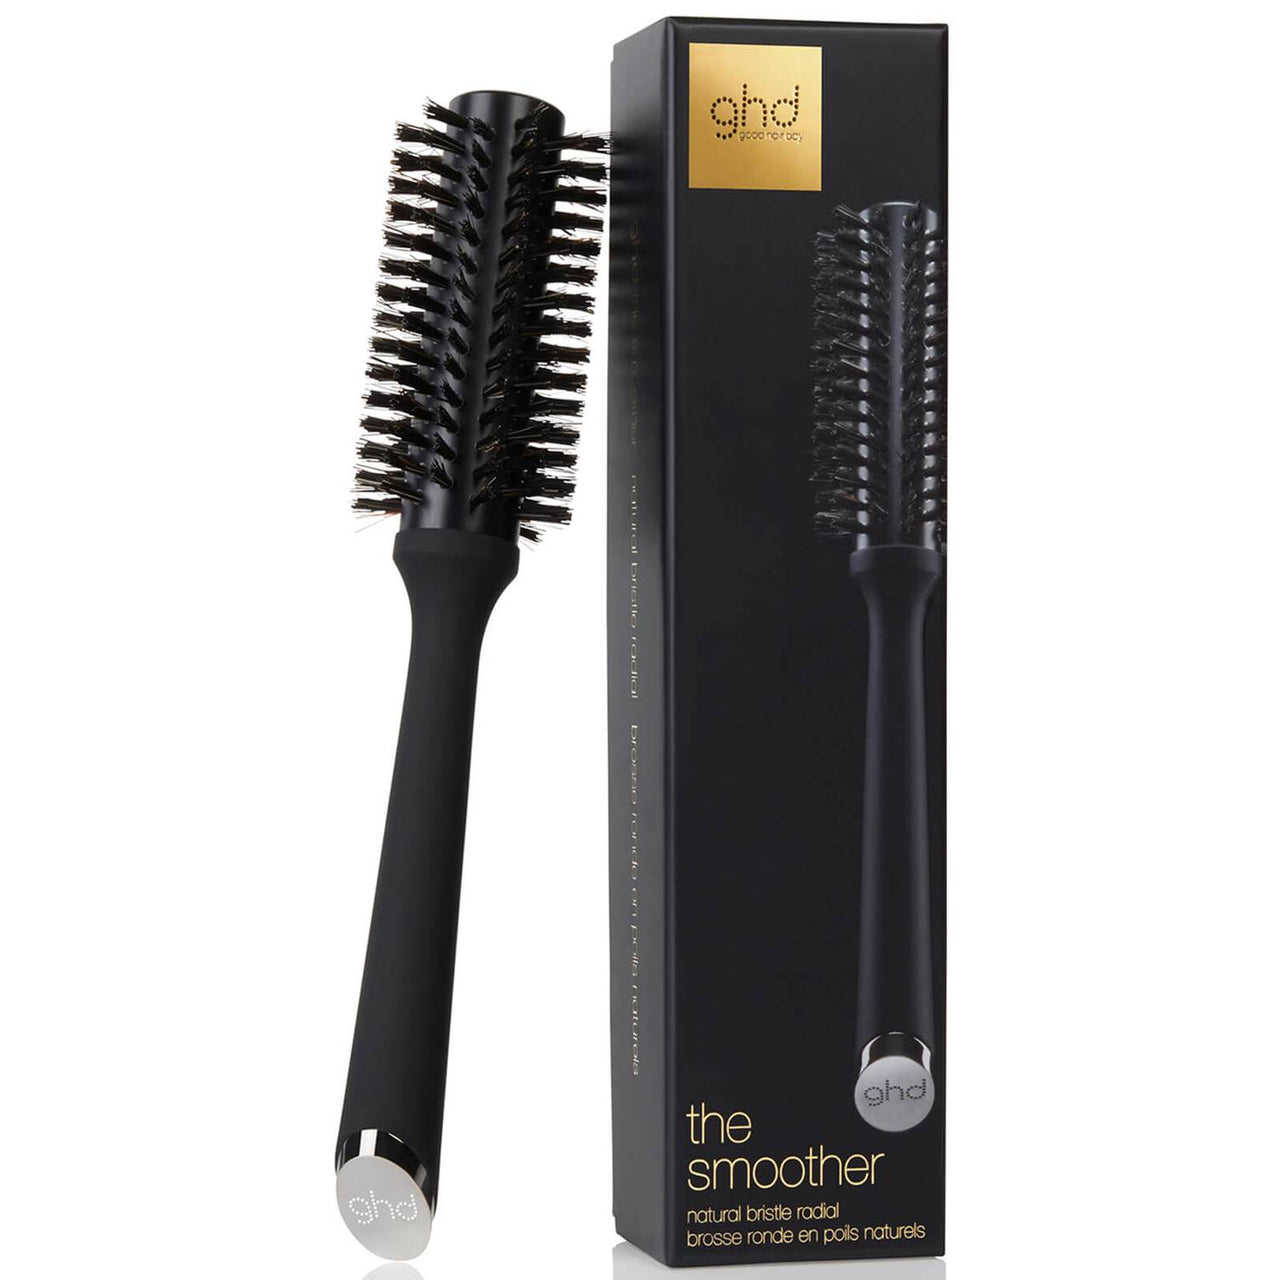 GHD The smoother Natural Bristle Brush